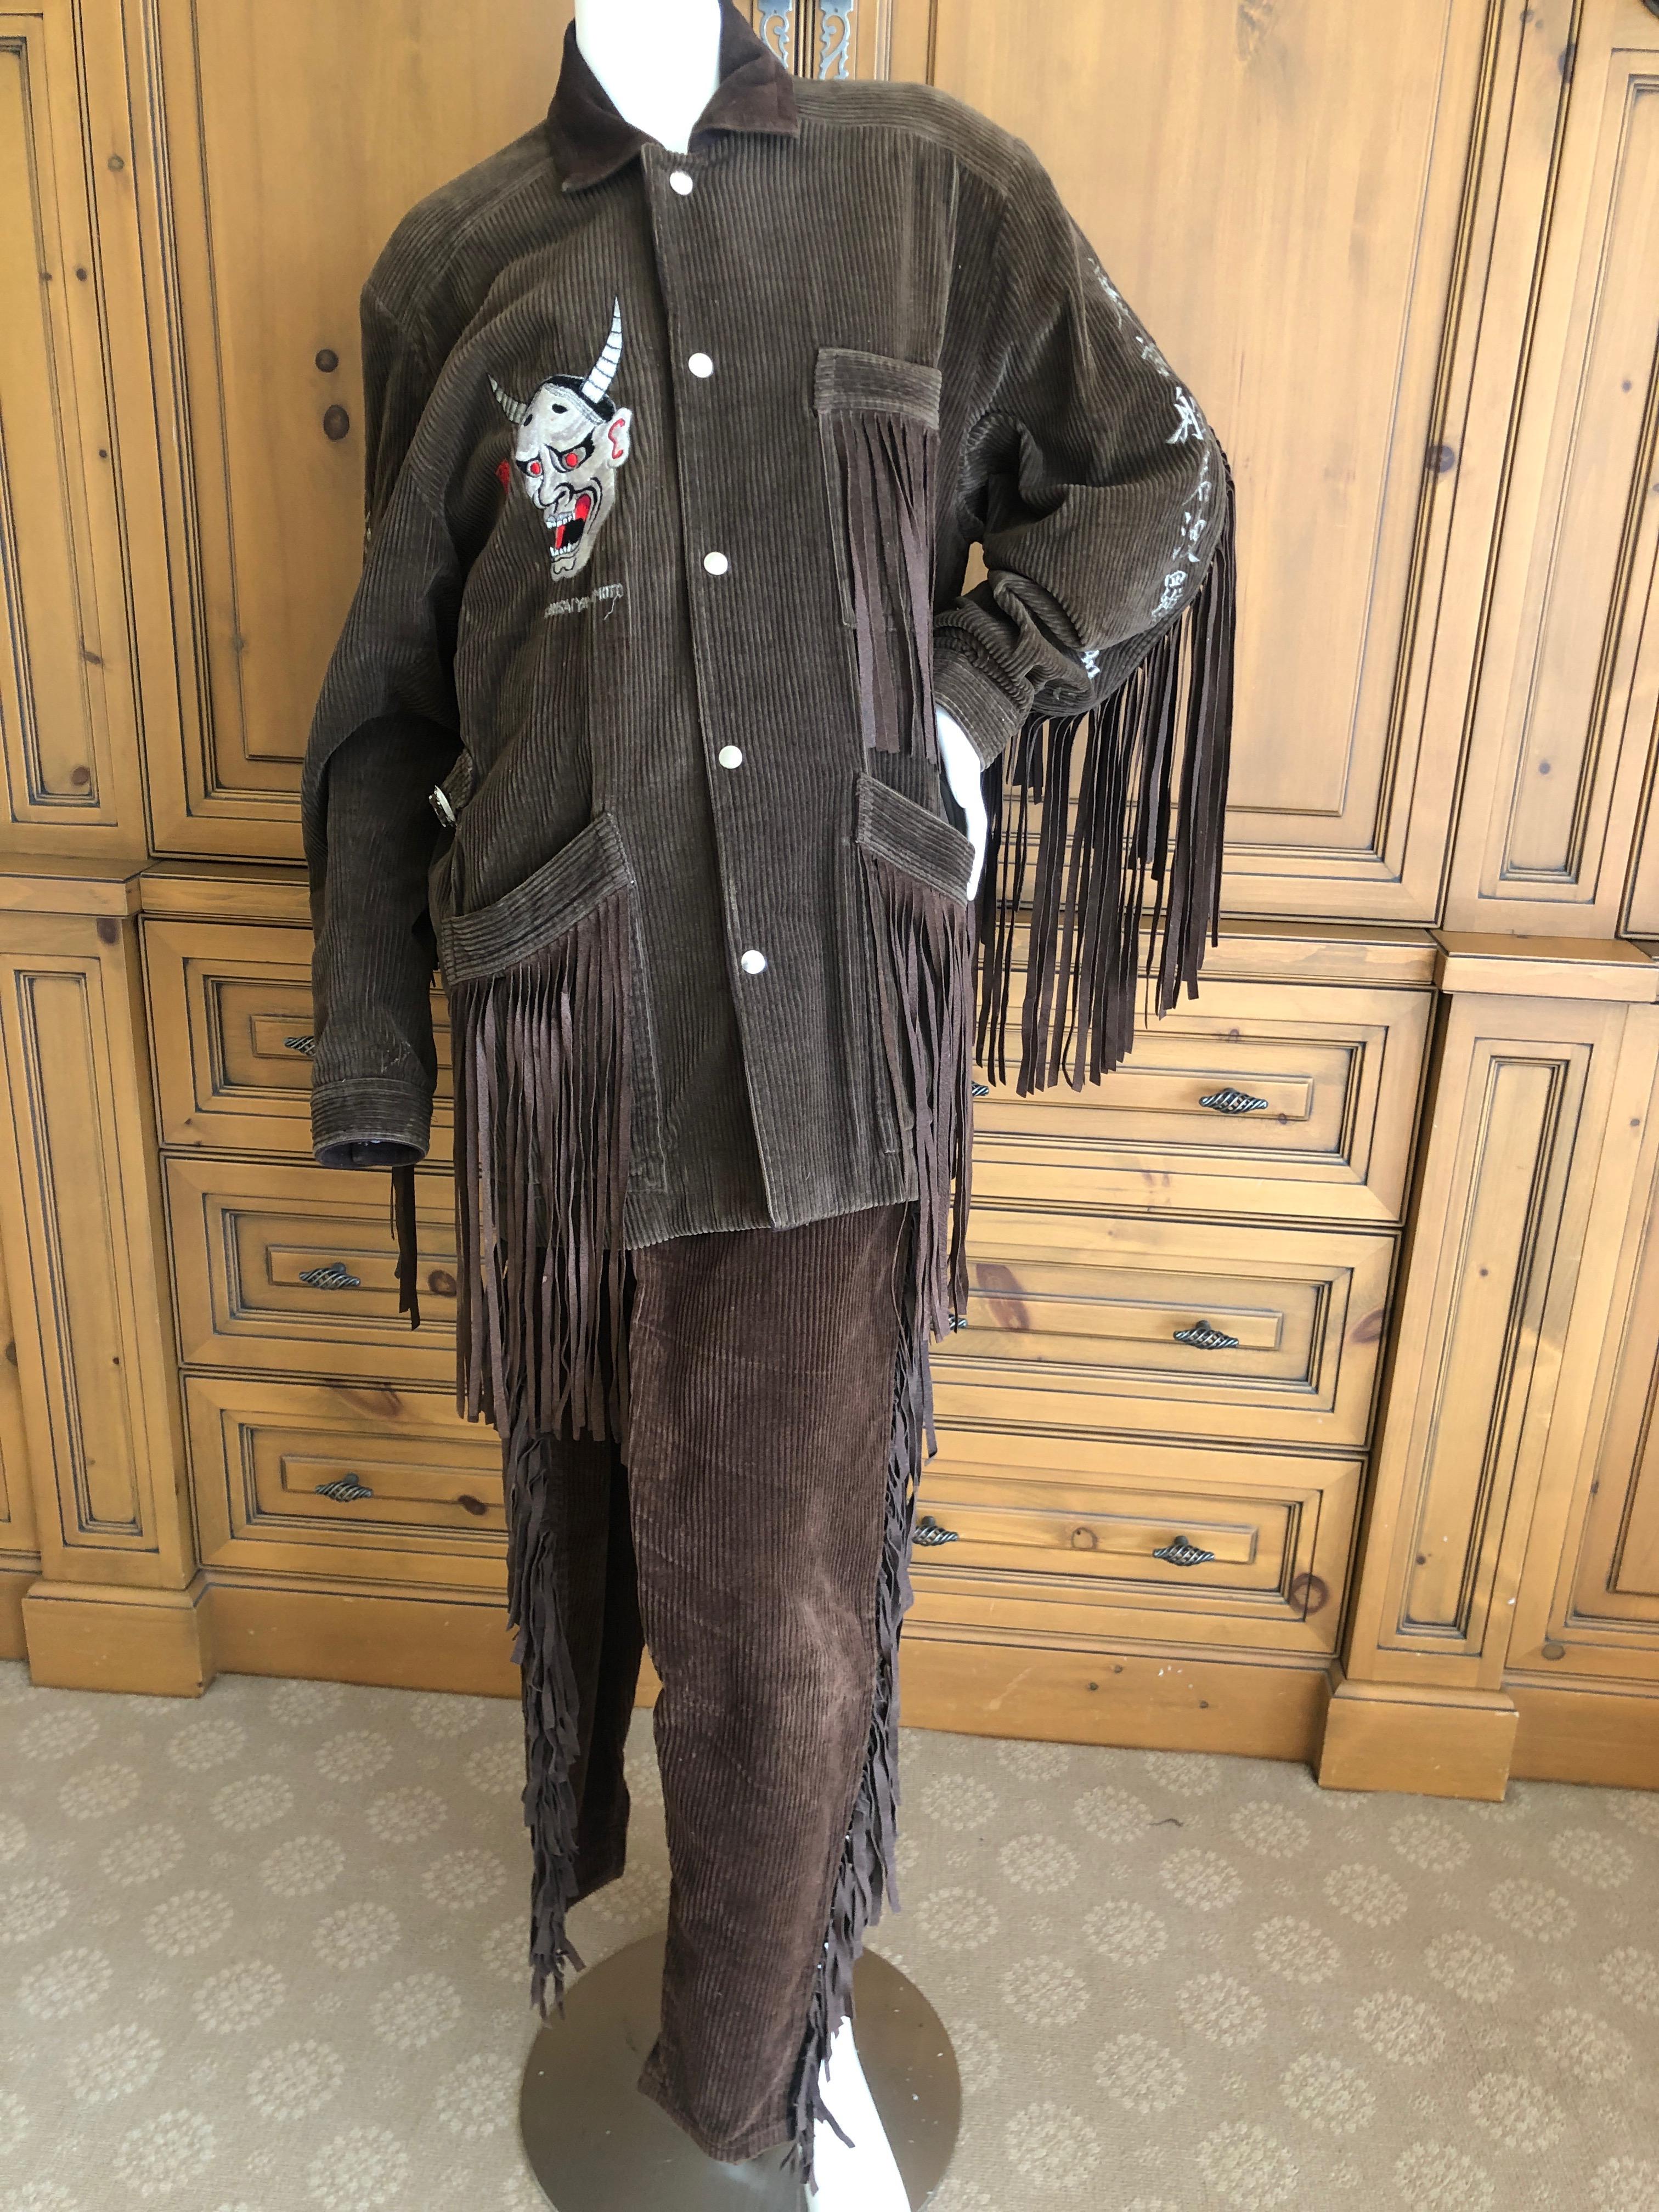 KANSAI YAMAMOTO 1981 Rare Collectible Unisex Embellished Jacket w Suede Fringe
Will fit men or women.
Chest/Bust 46